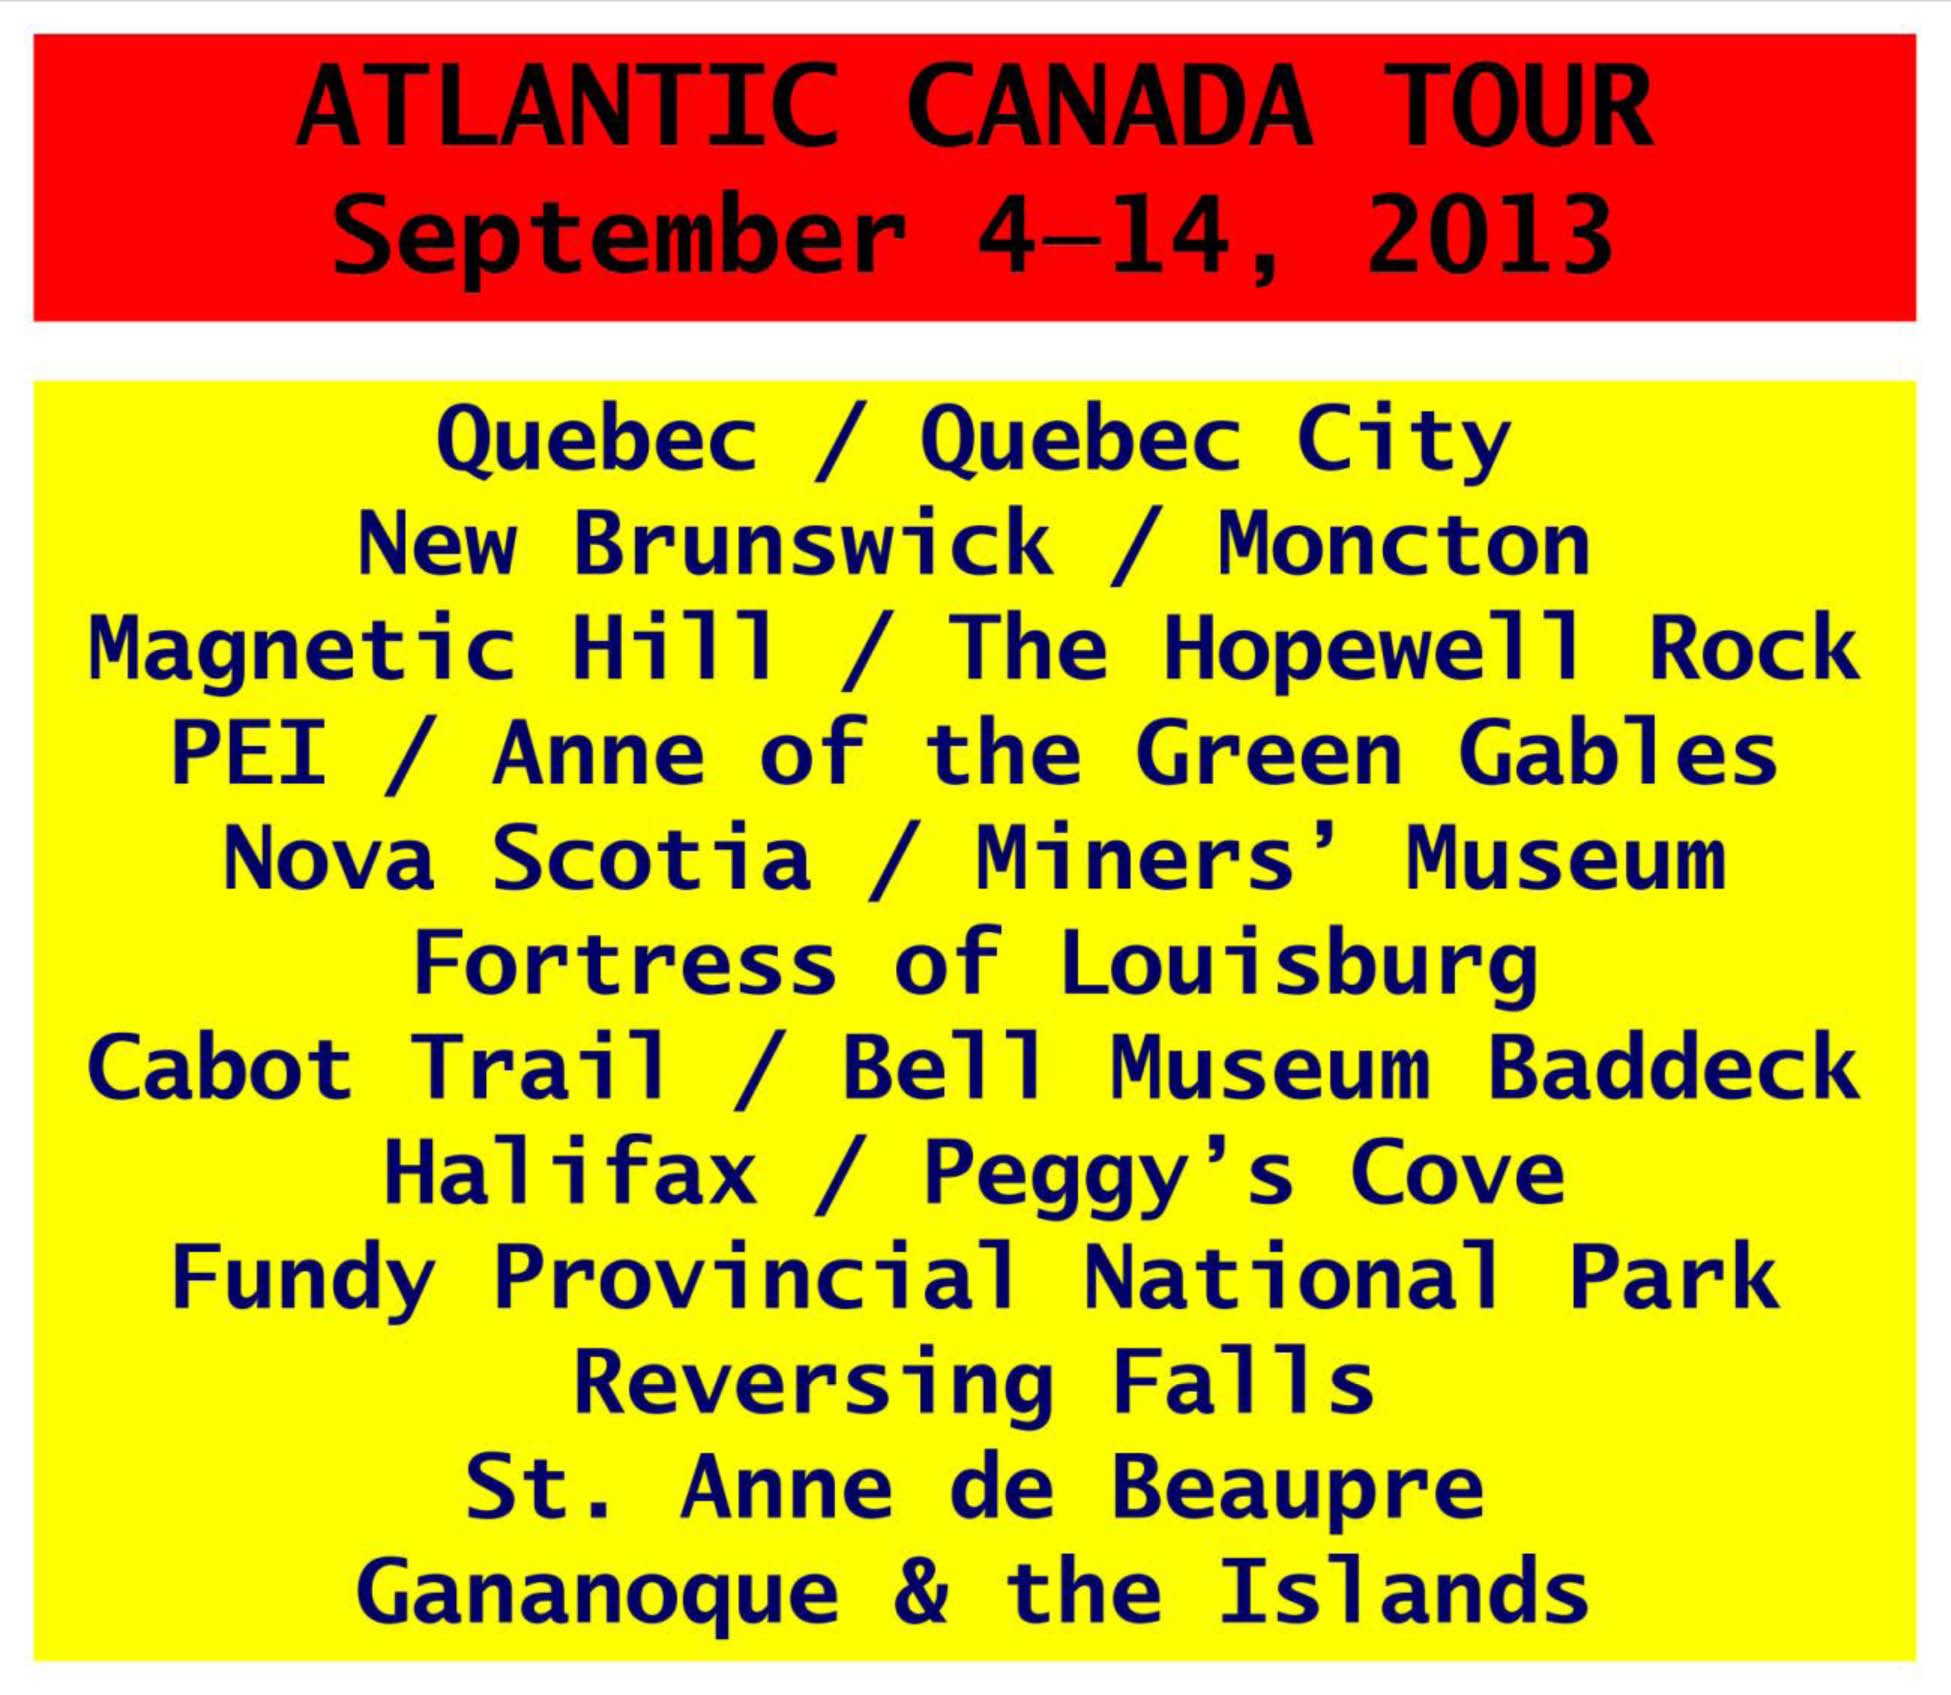 Atlantic Canada Tour cover page.jpg